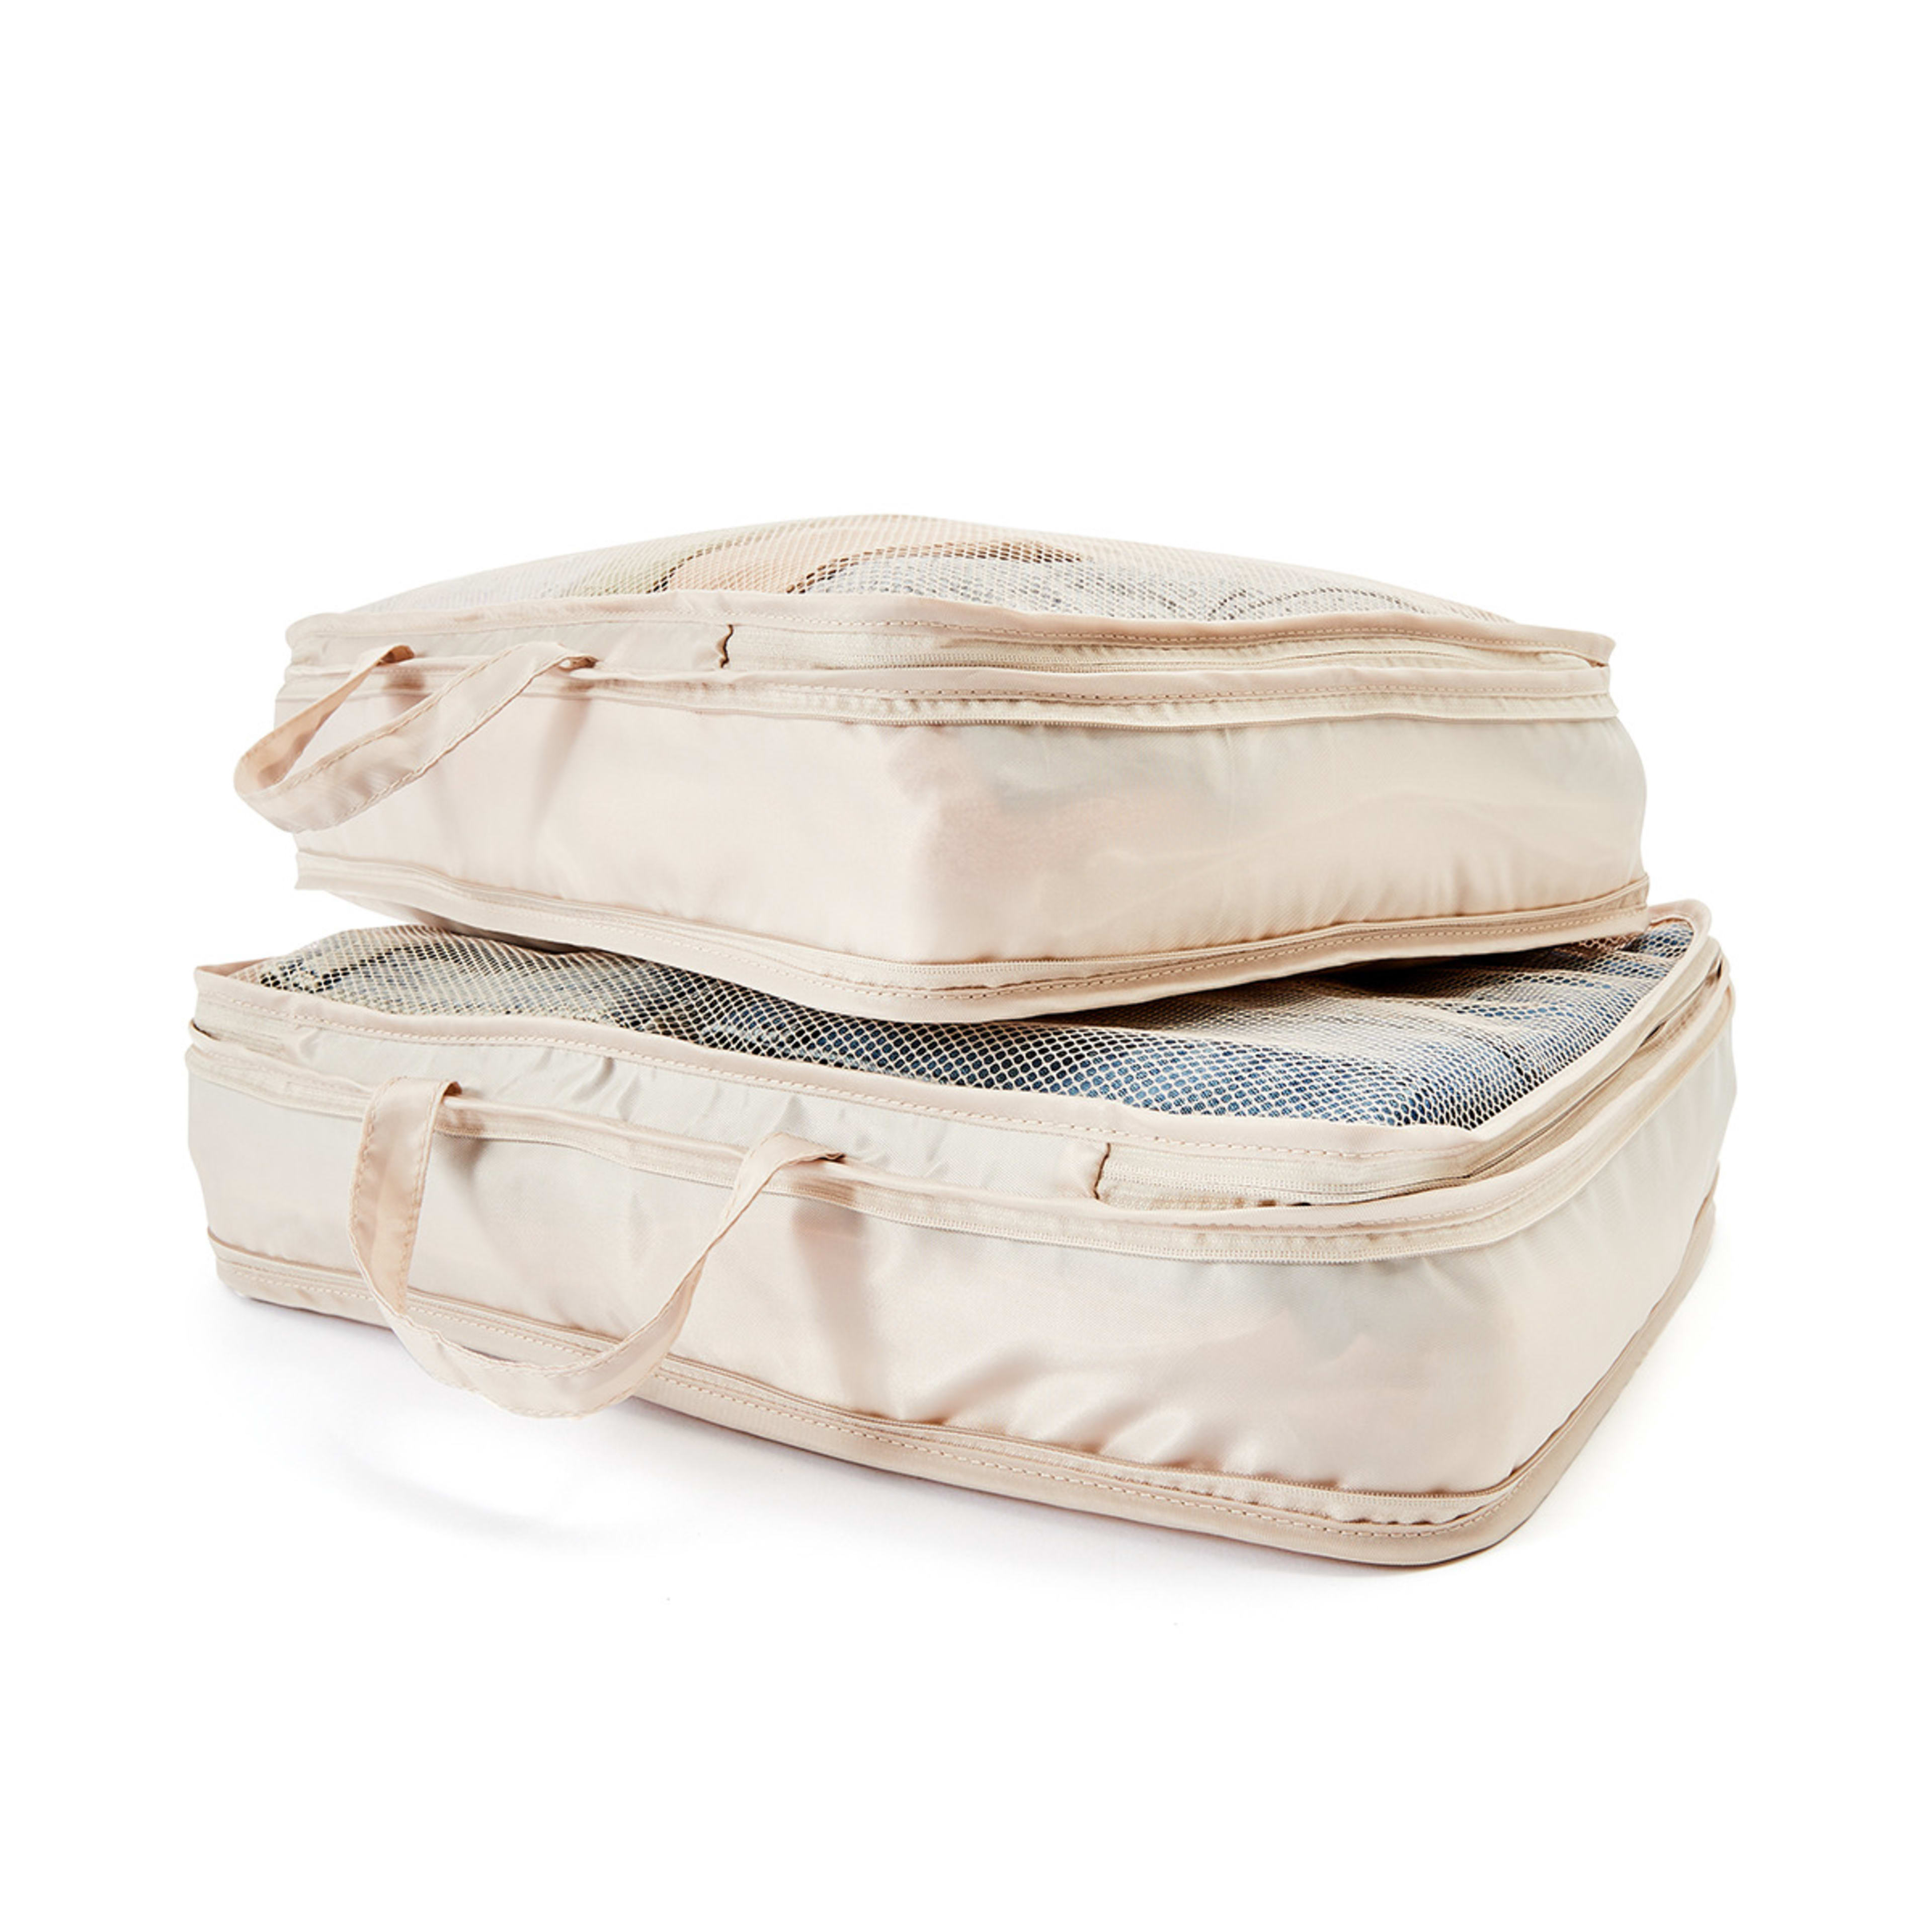 2 Piece Large Compression Packing Cubes - Taupe - Kmart